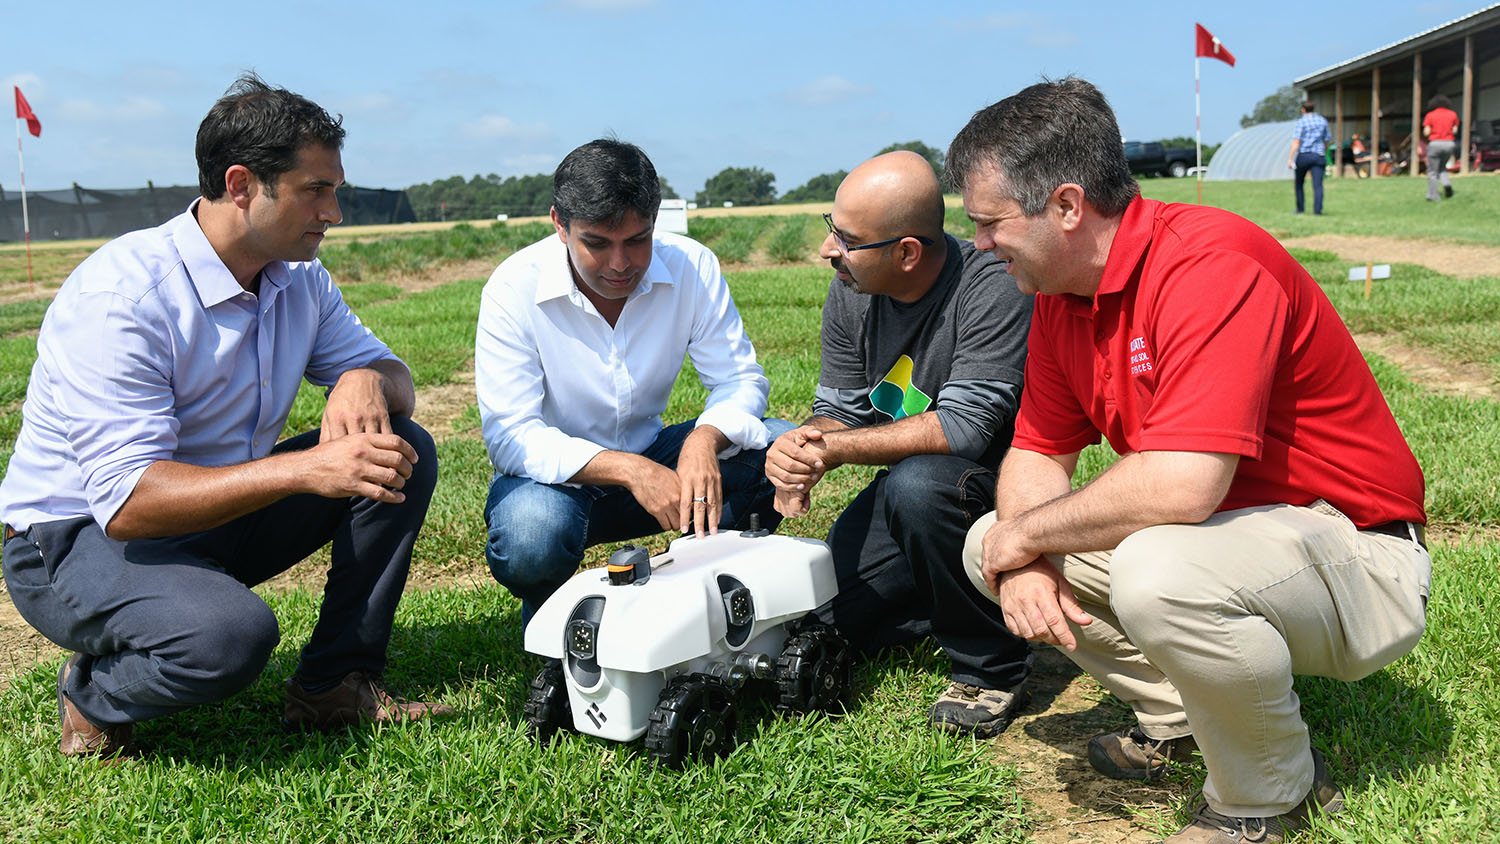 Chris Reberg-Horton and Steven Mirsky, co-leaders of a $10M sustainability grant examine an autonomous ag data collection robot.